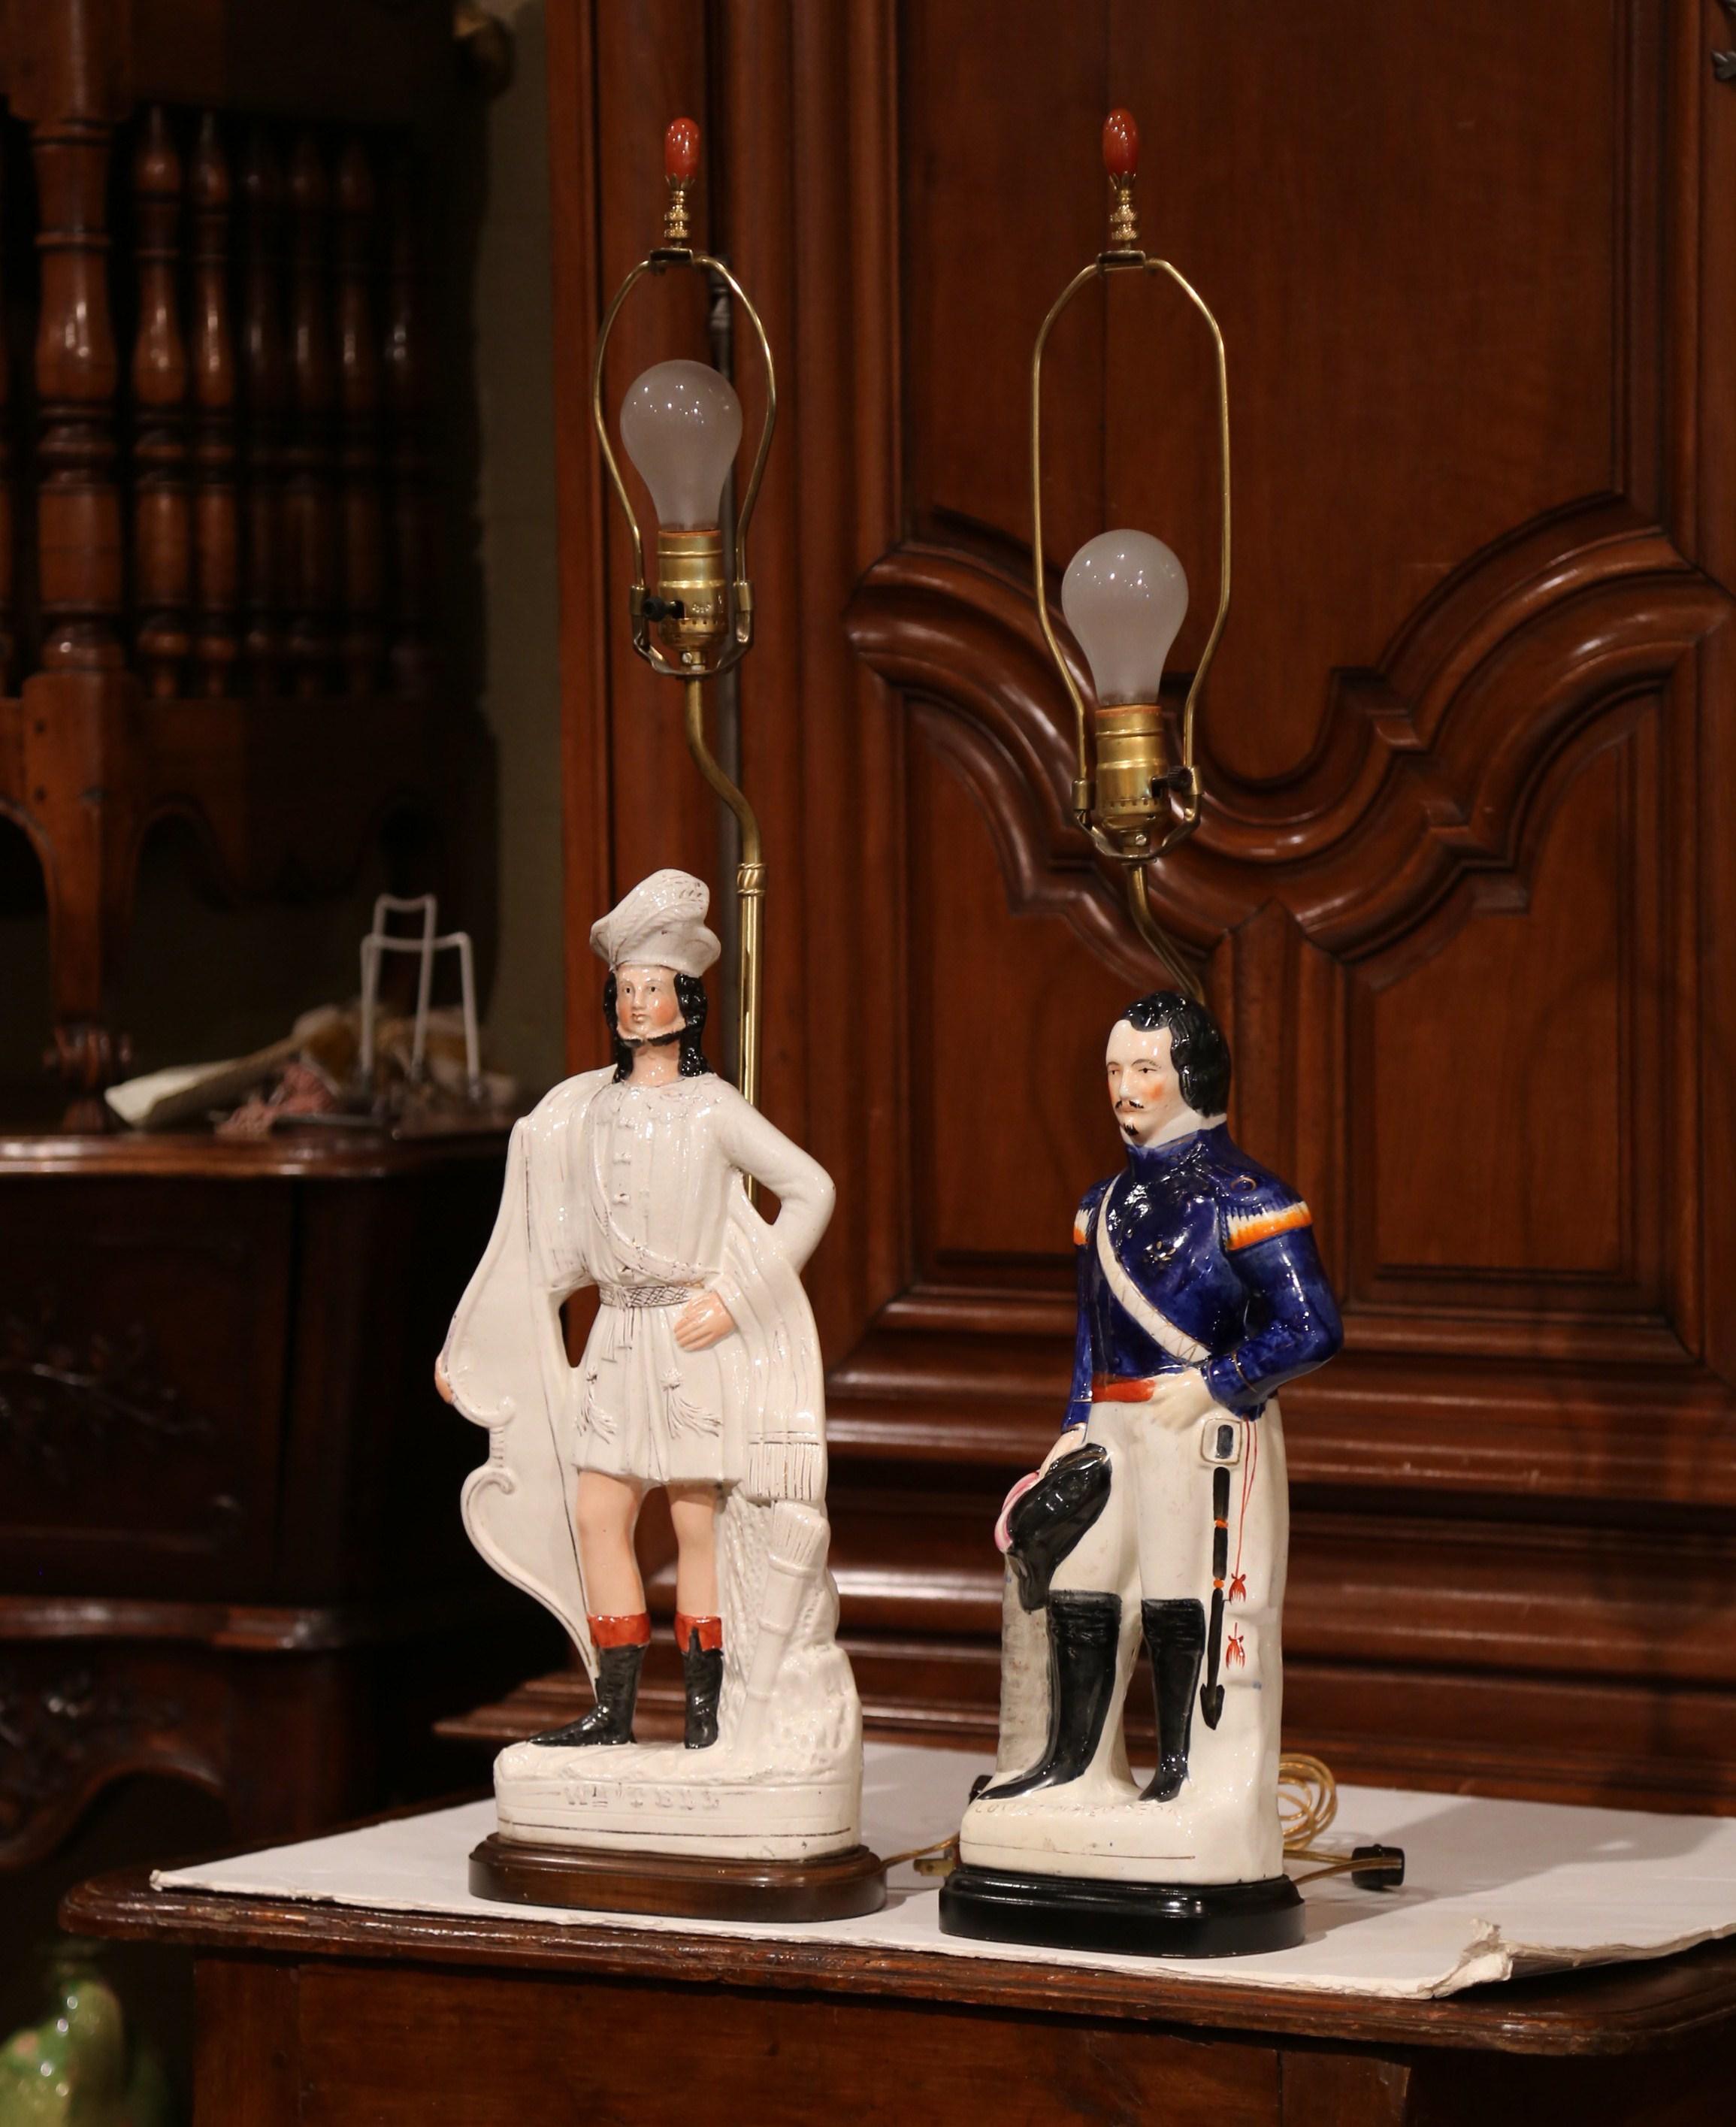 Porcelain Pair of 19th Century English Staffordshire Ceramic Figures Made into Table Lamps